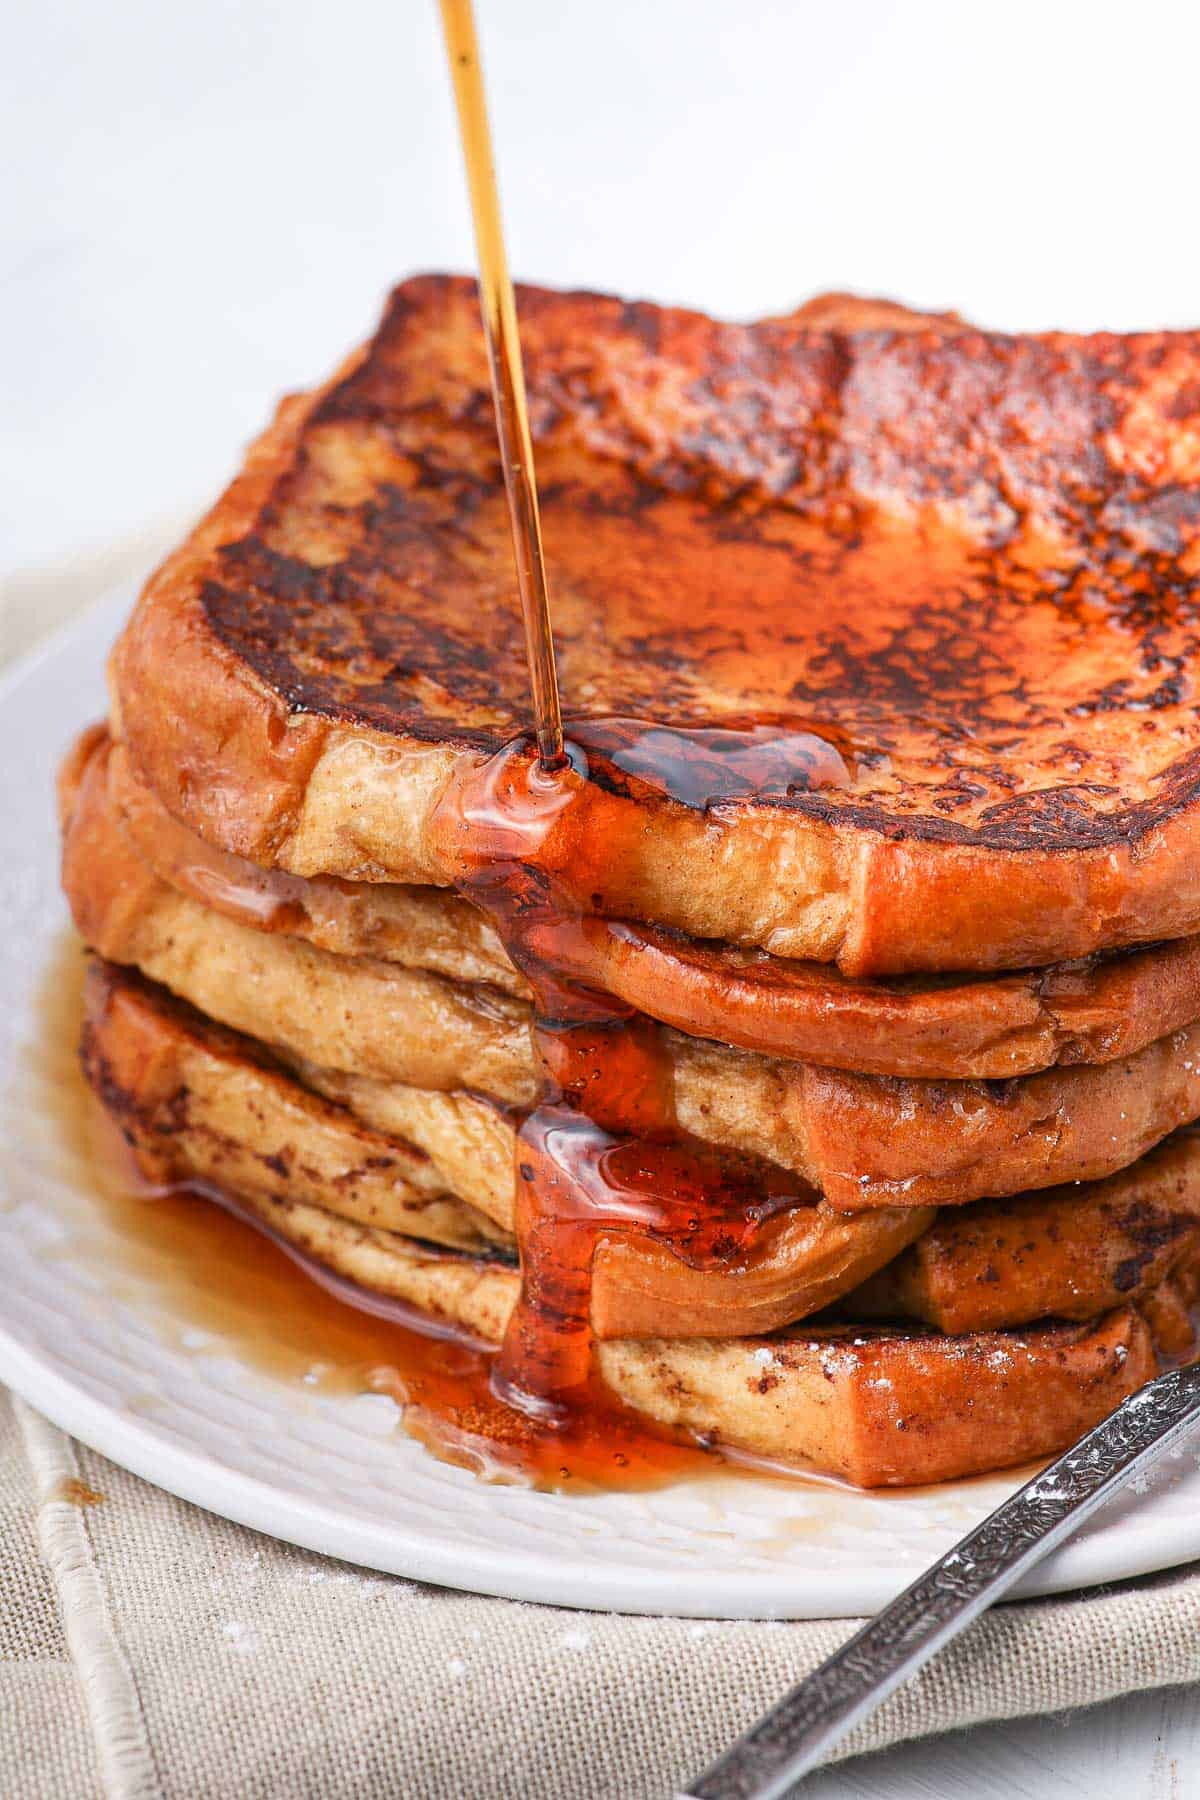 Pouring maple syrup over a stack of french toast.